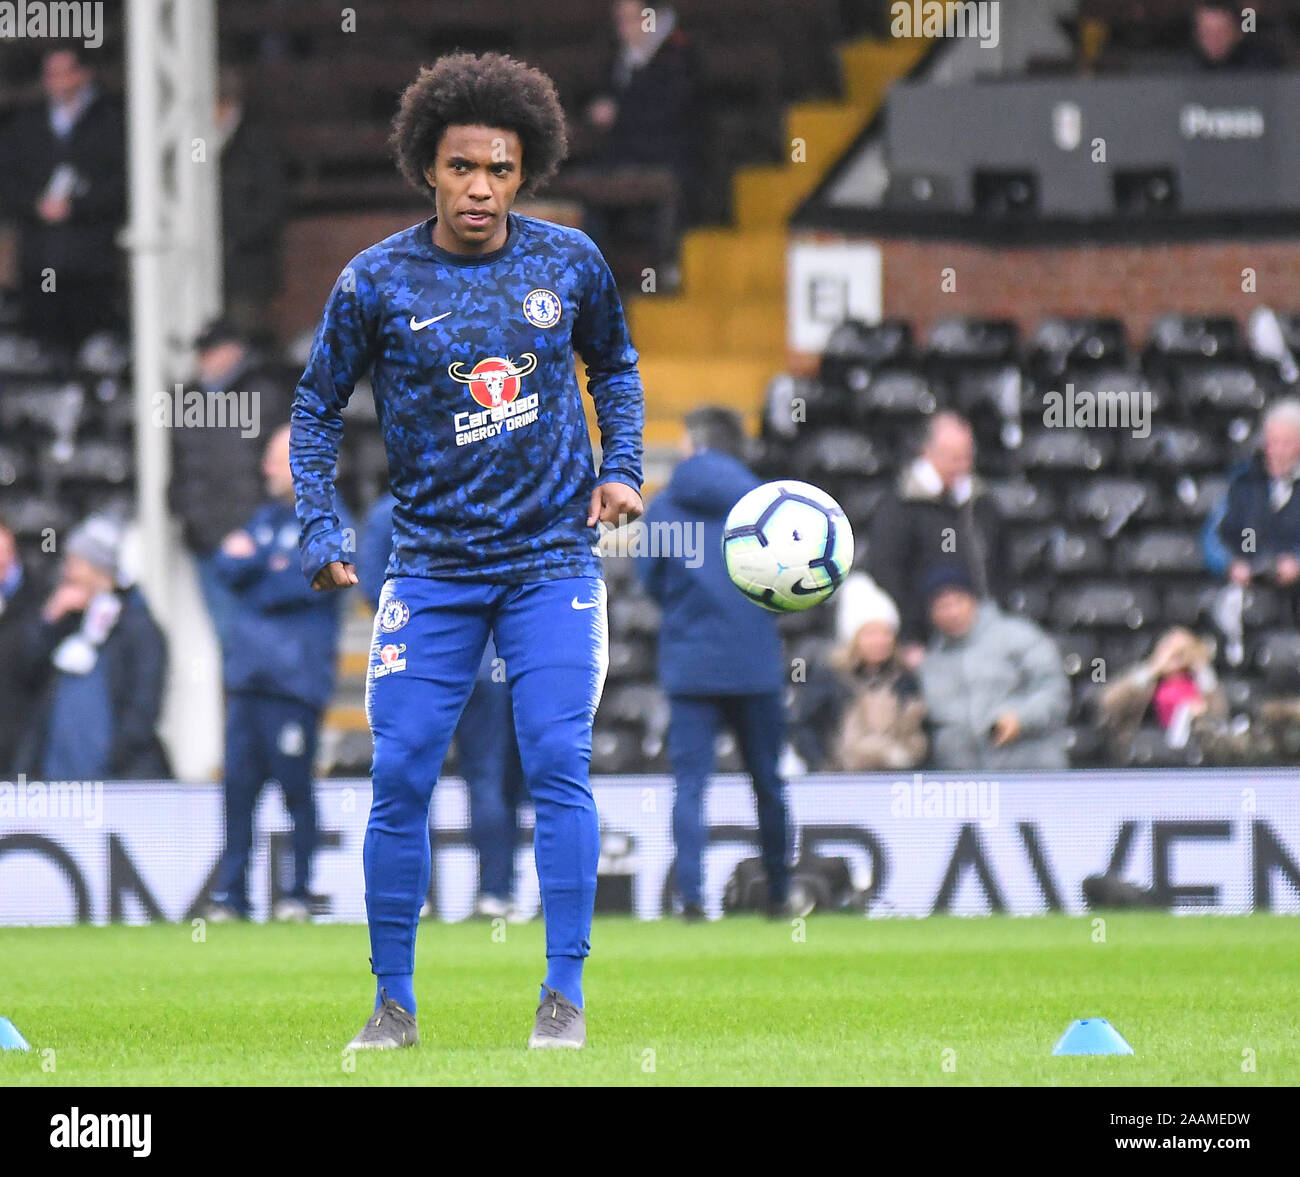 LONDON, ENGLAND - MARCH 3, 2019: Willian Borges da Silva of Chelsea pictured ahead of the 2018/19 Premier League game between Fulham FC and Chelsea FC at Craven Cottage. Stock Photo